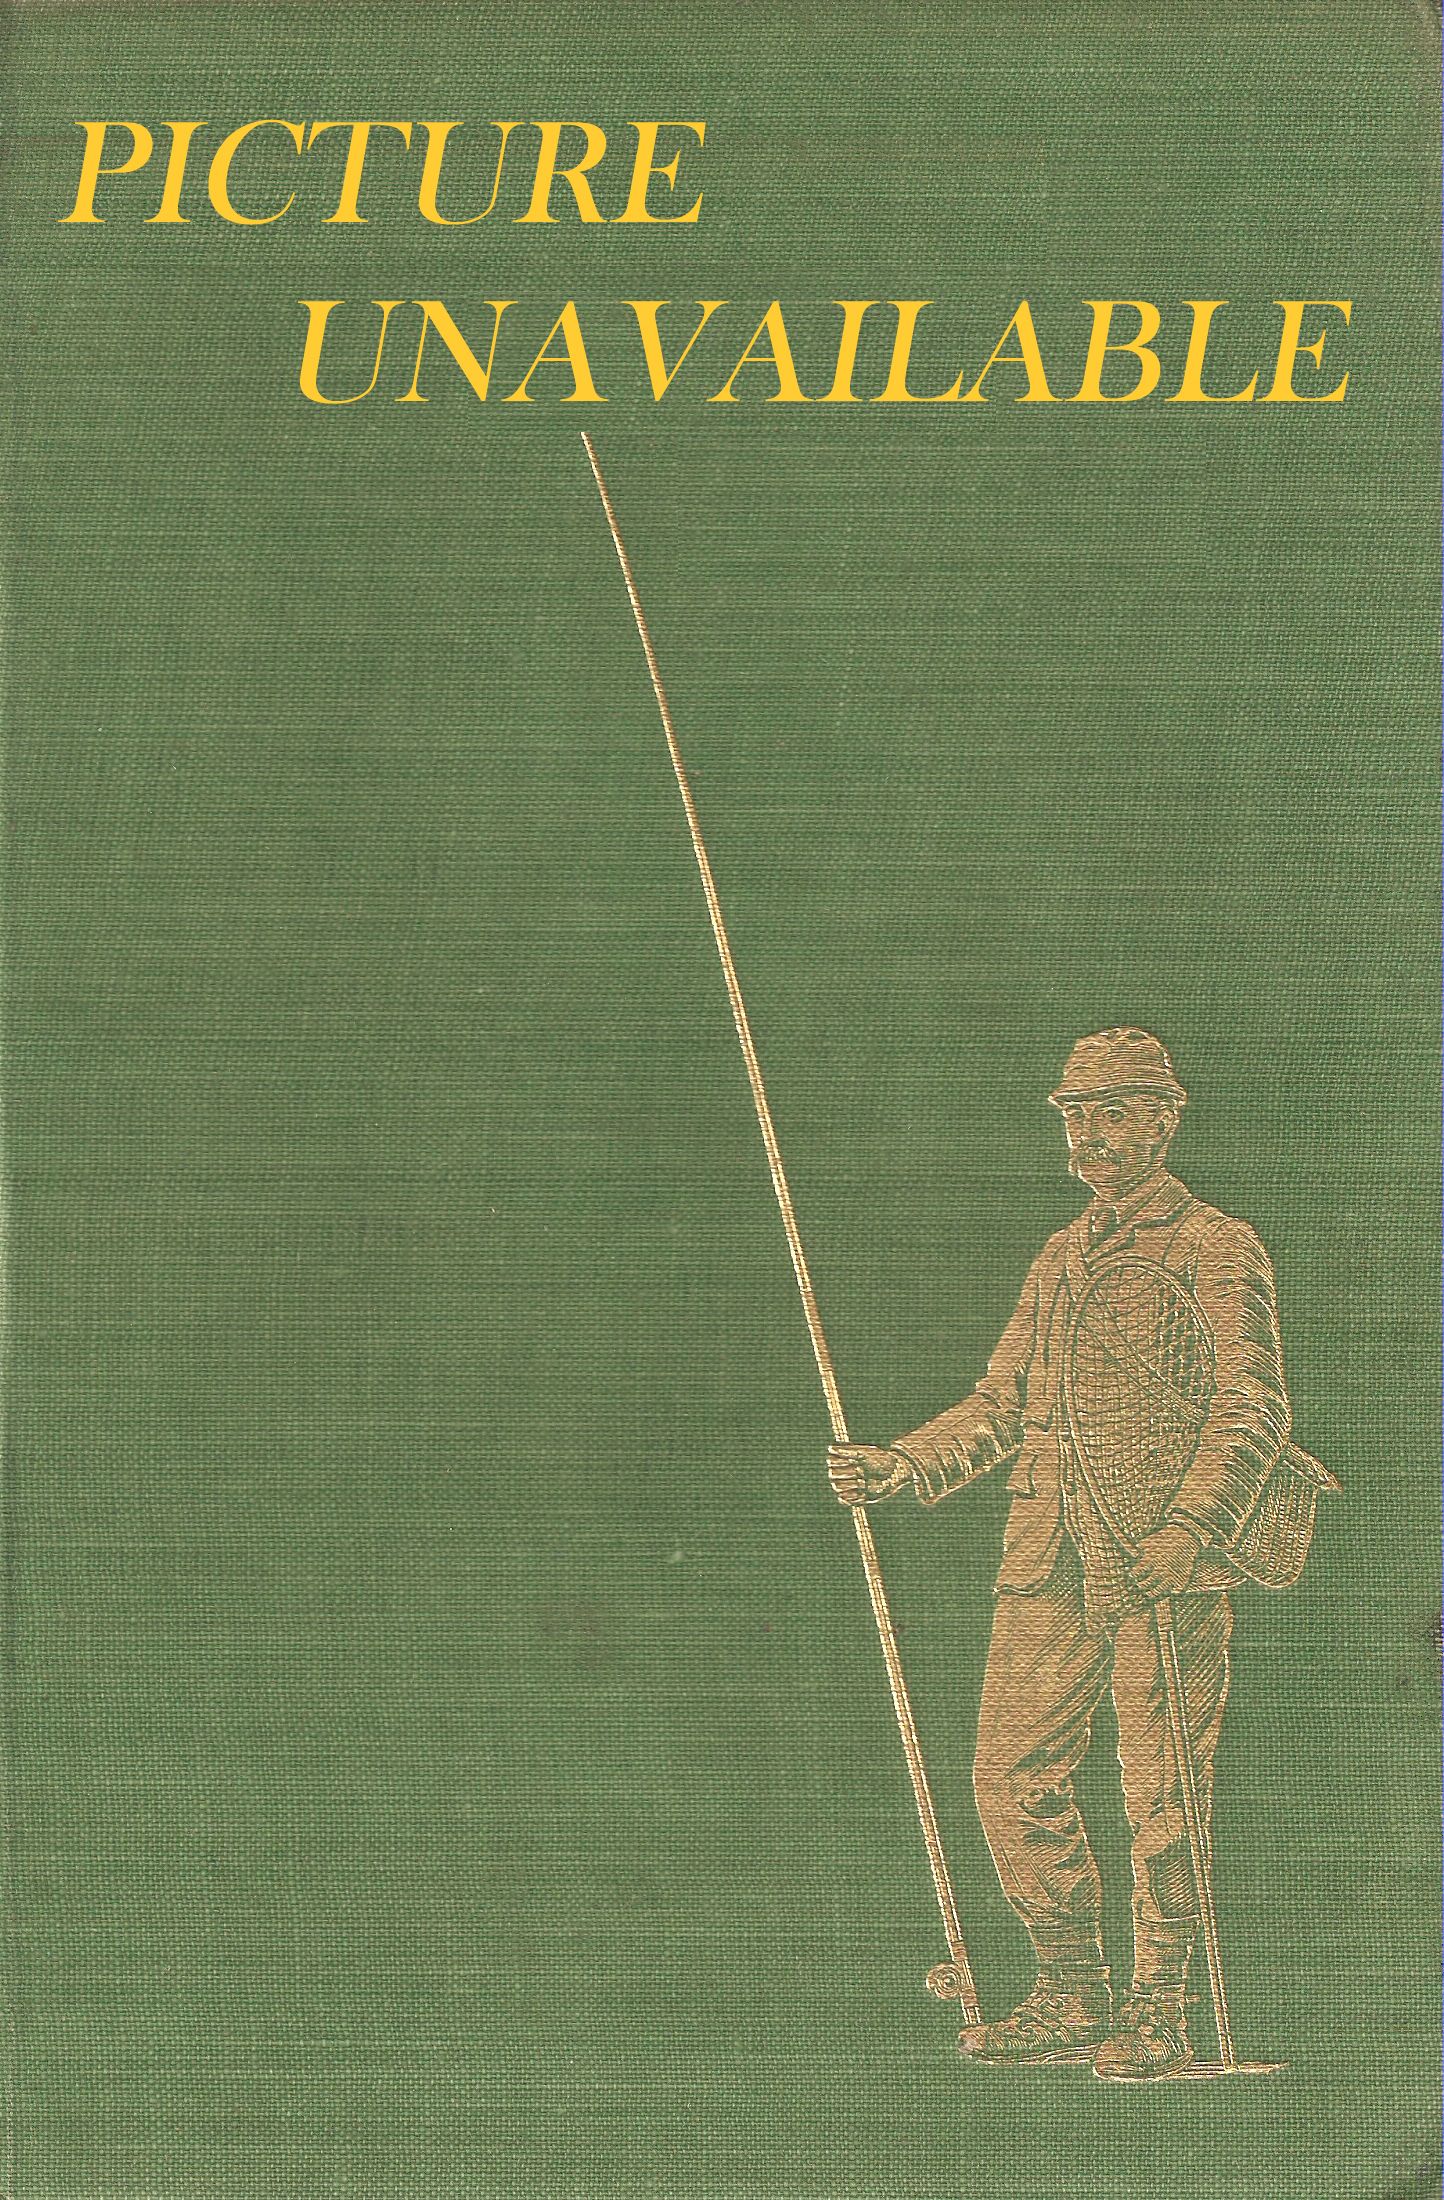 THE ACCIDENTAL ANGLER. By Charles Rangeley-Wilson.